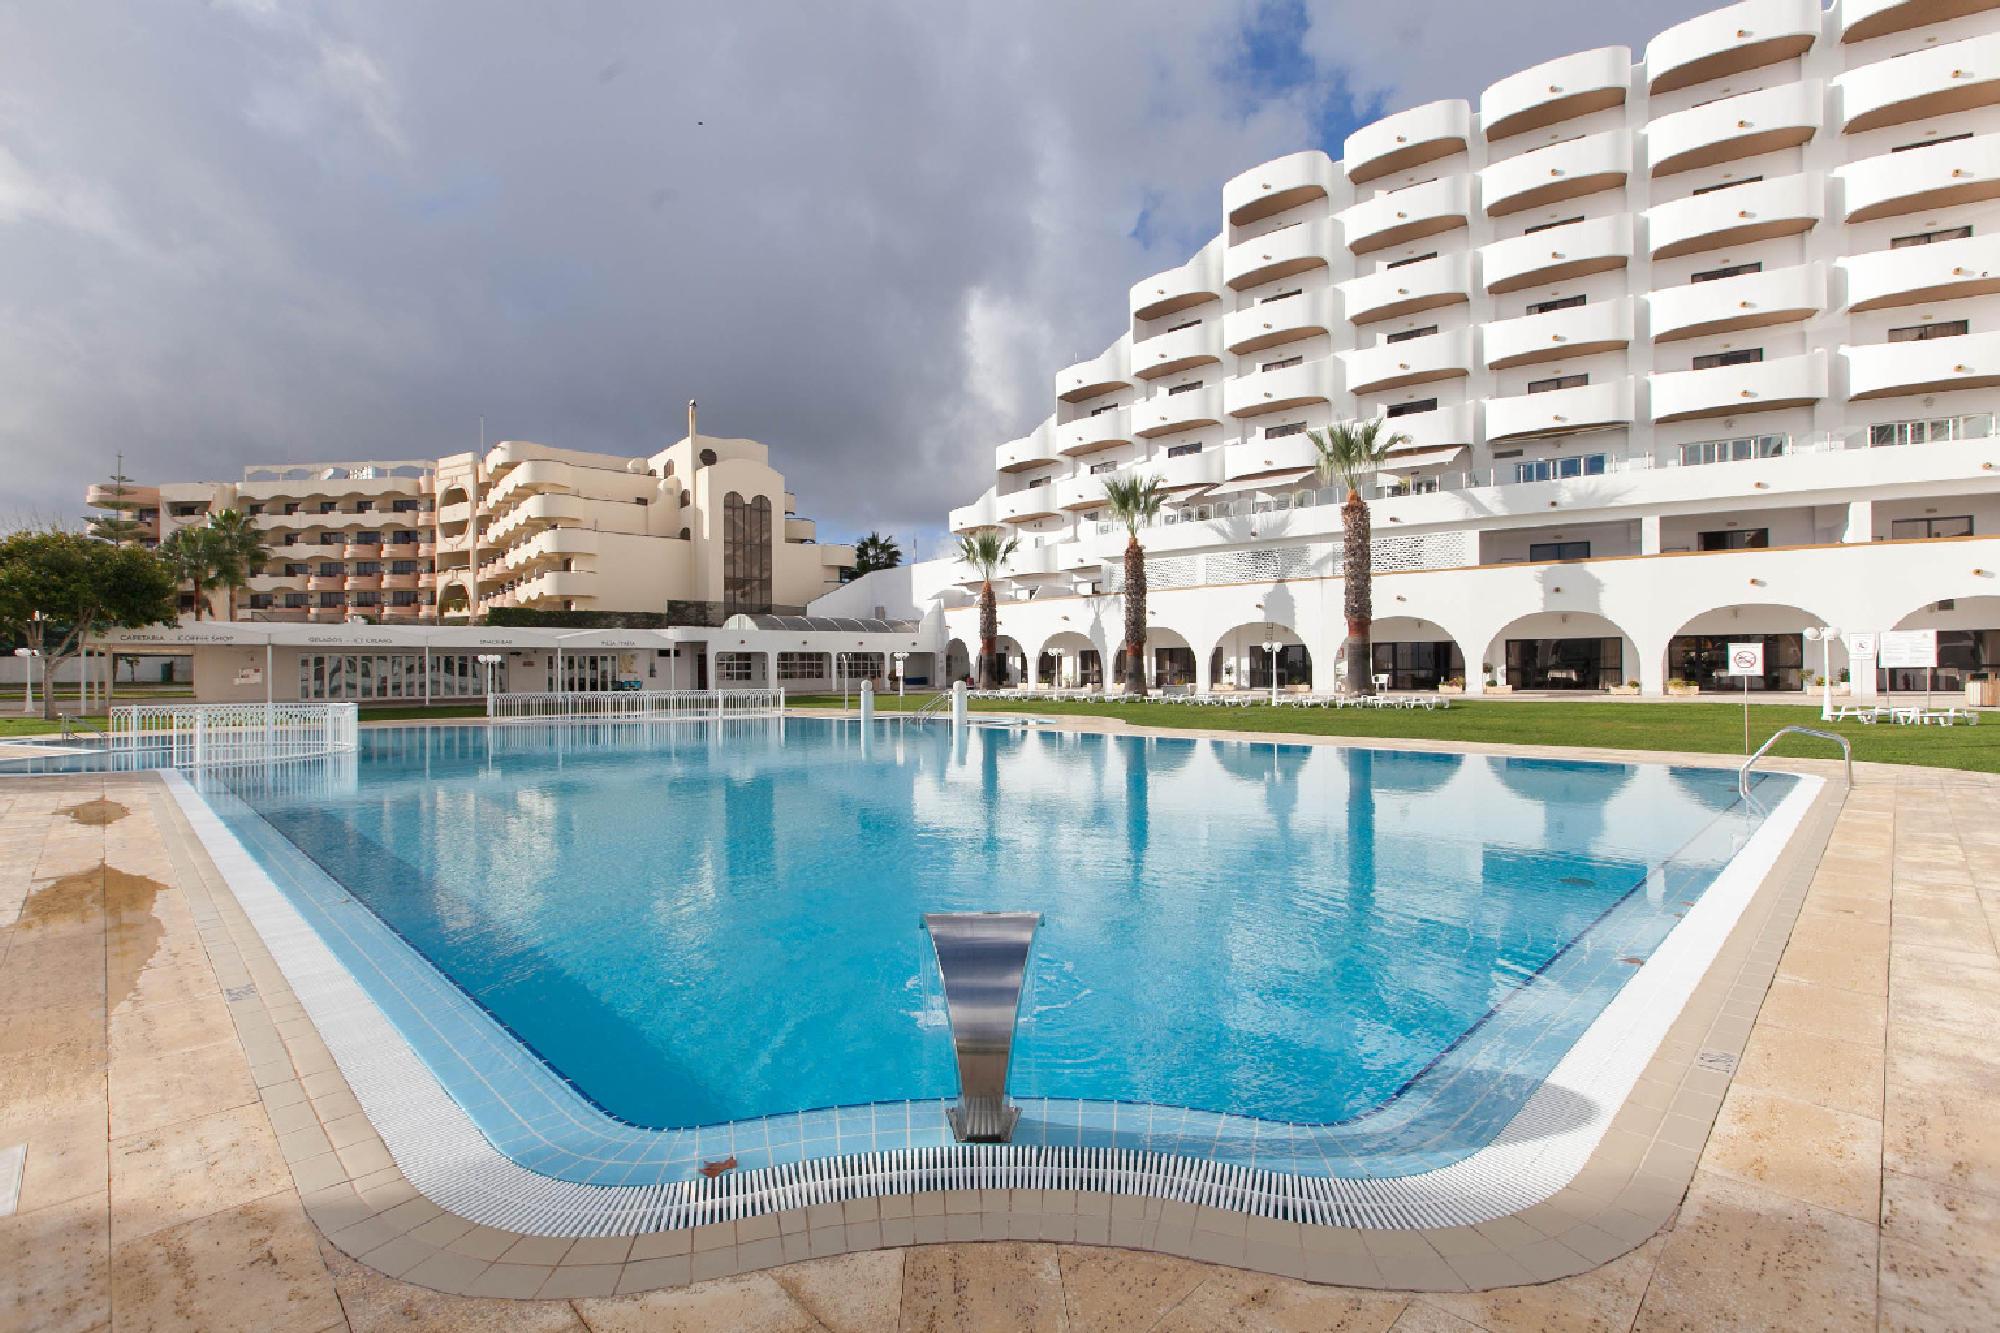 Hotel Brisa Sol hosts a great main pool within Algarve